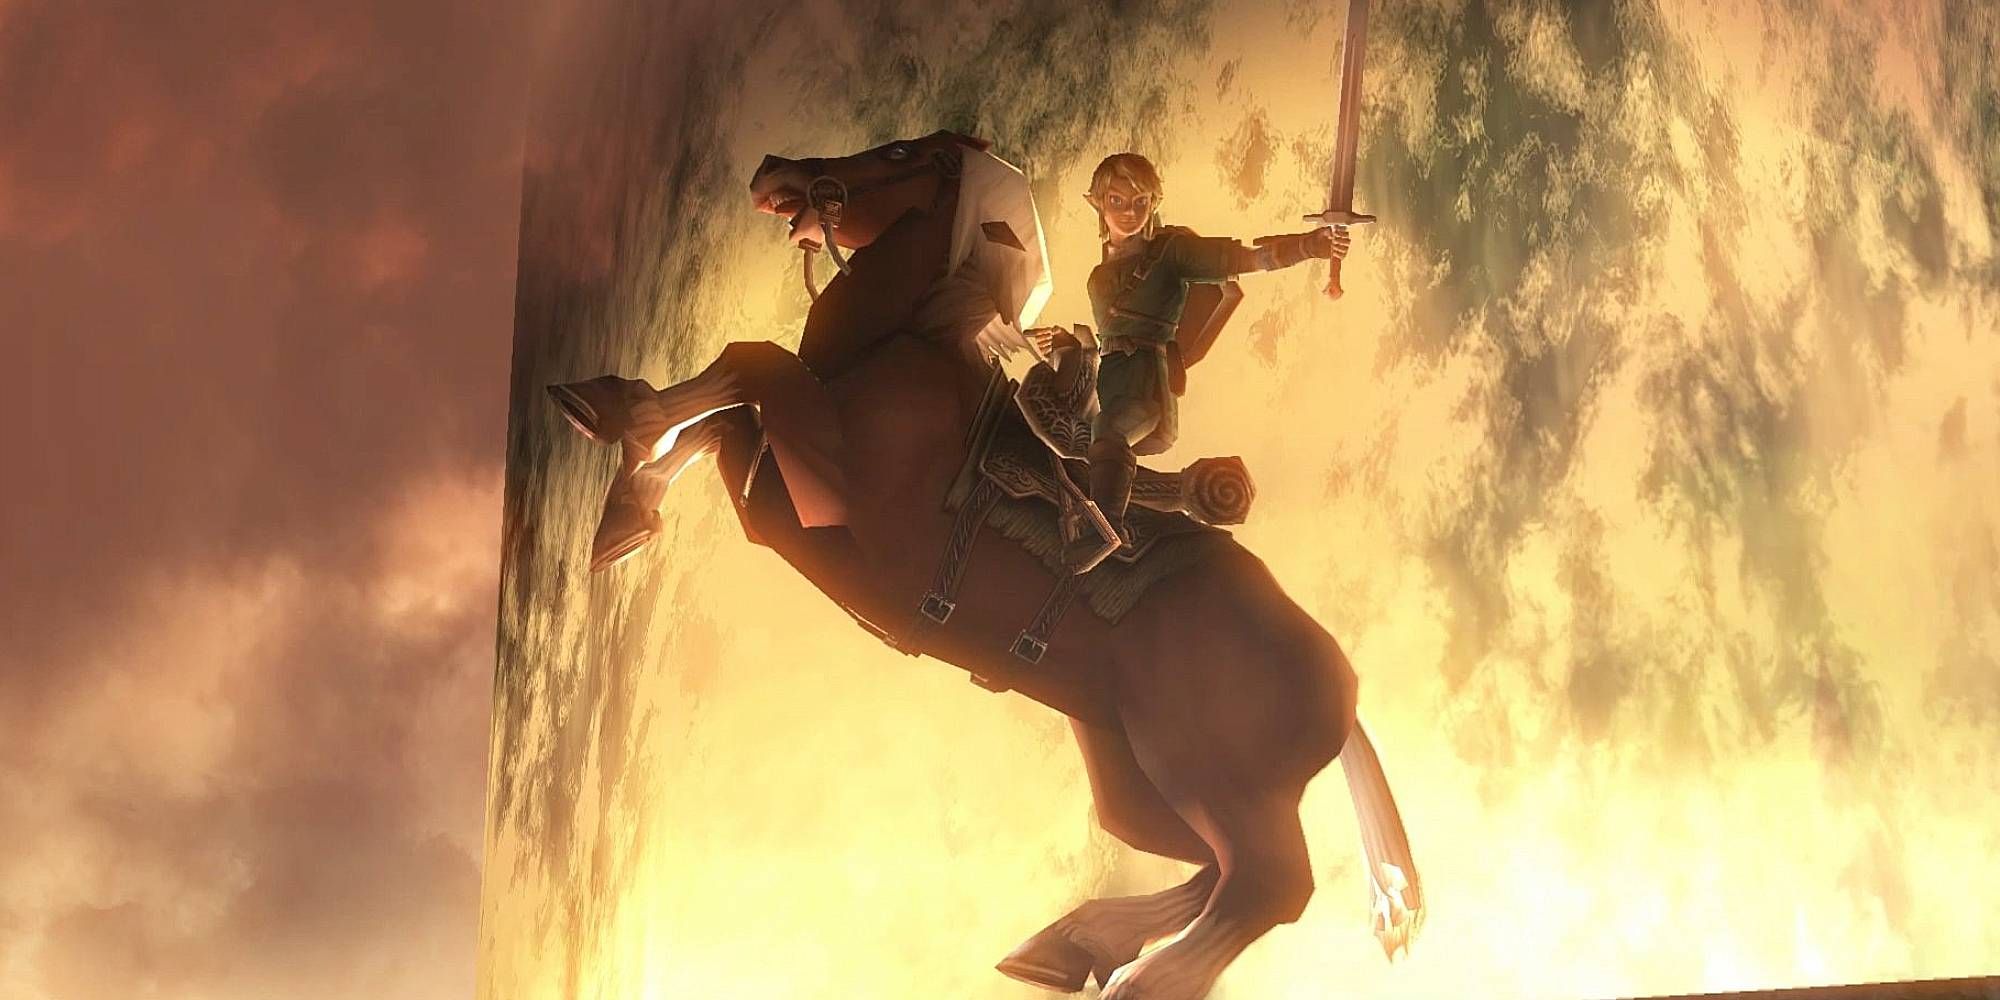 Link rides on his horse as fire is in the background, he holds his sword up